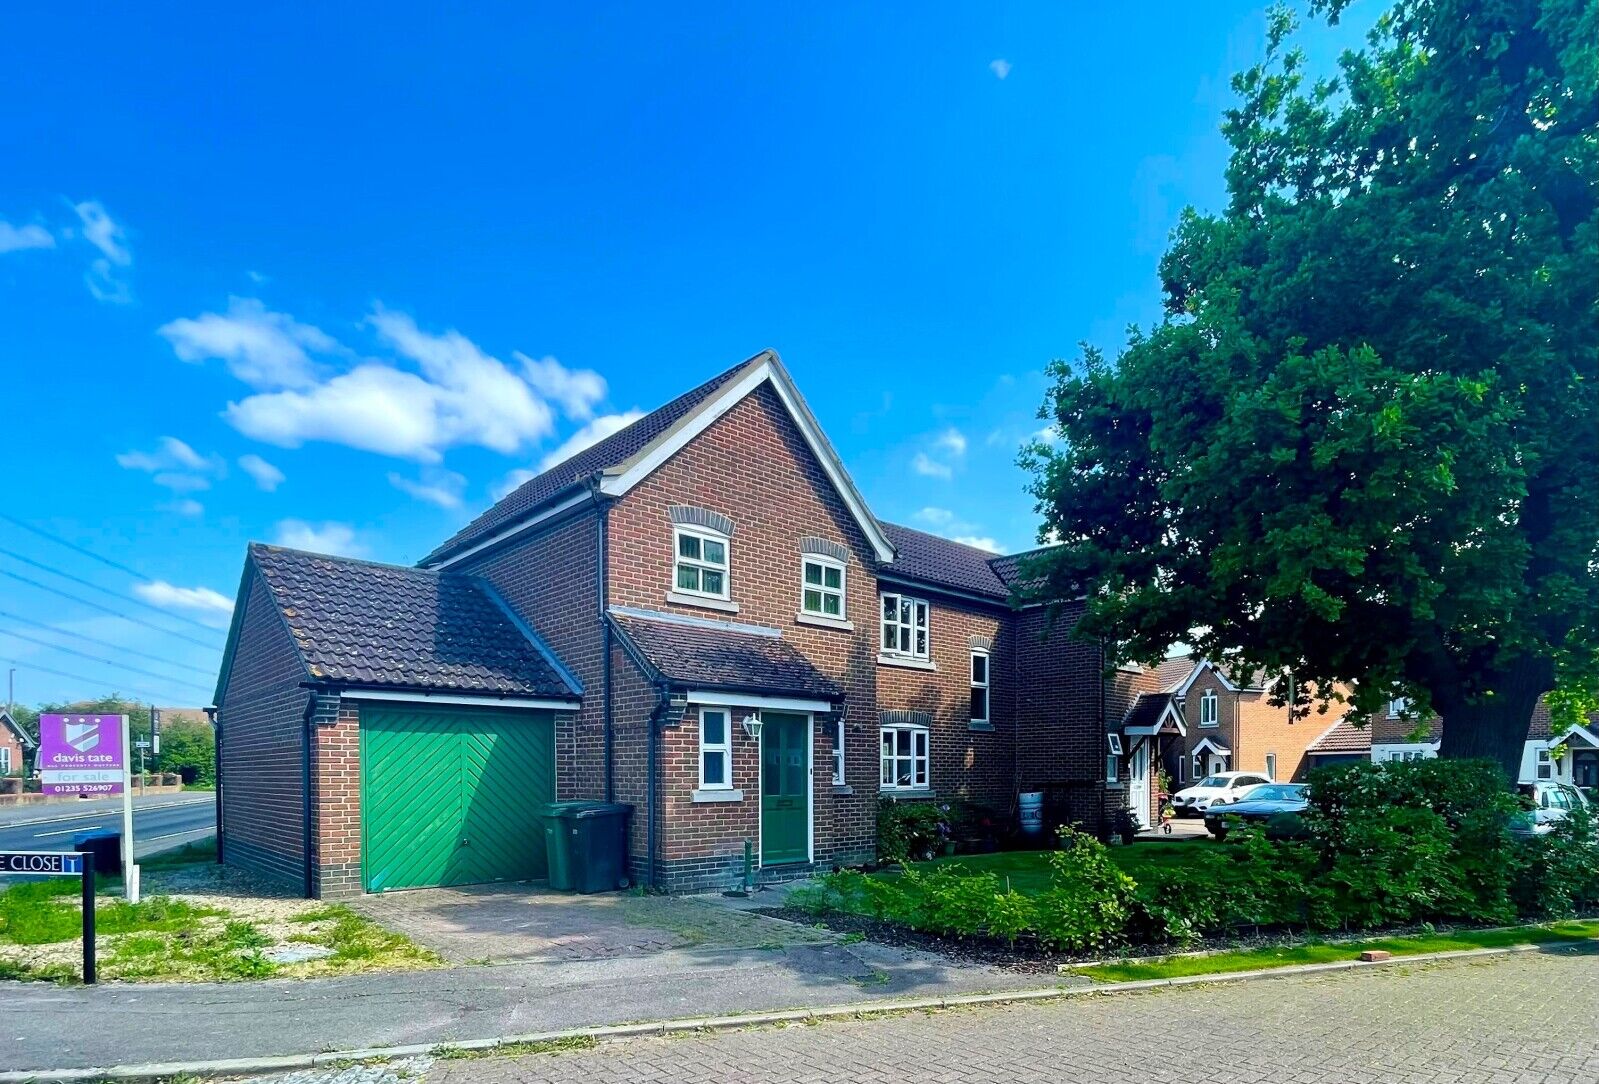 2 bedroom semi detached house for sale Swarbourne Close, Didcot, OX11, main image